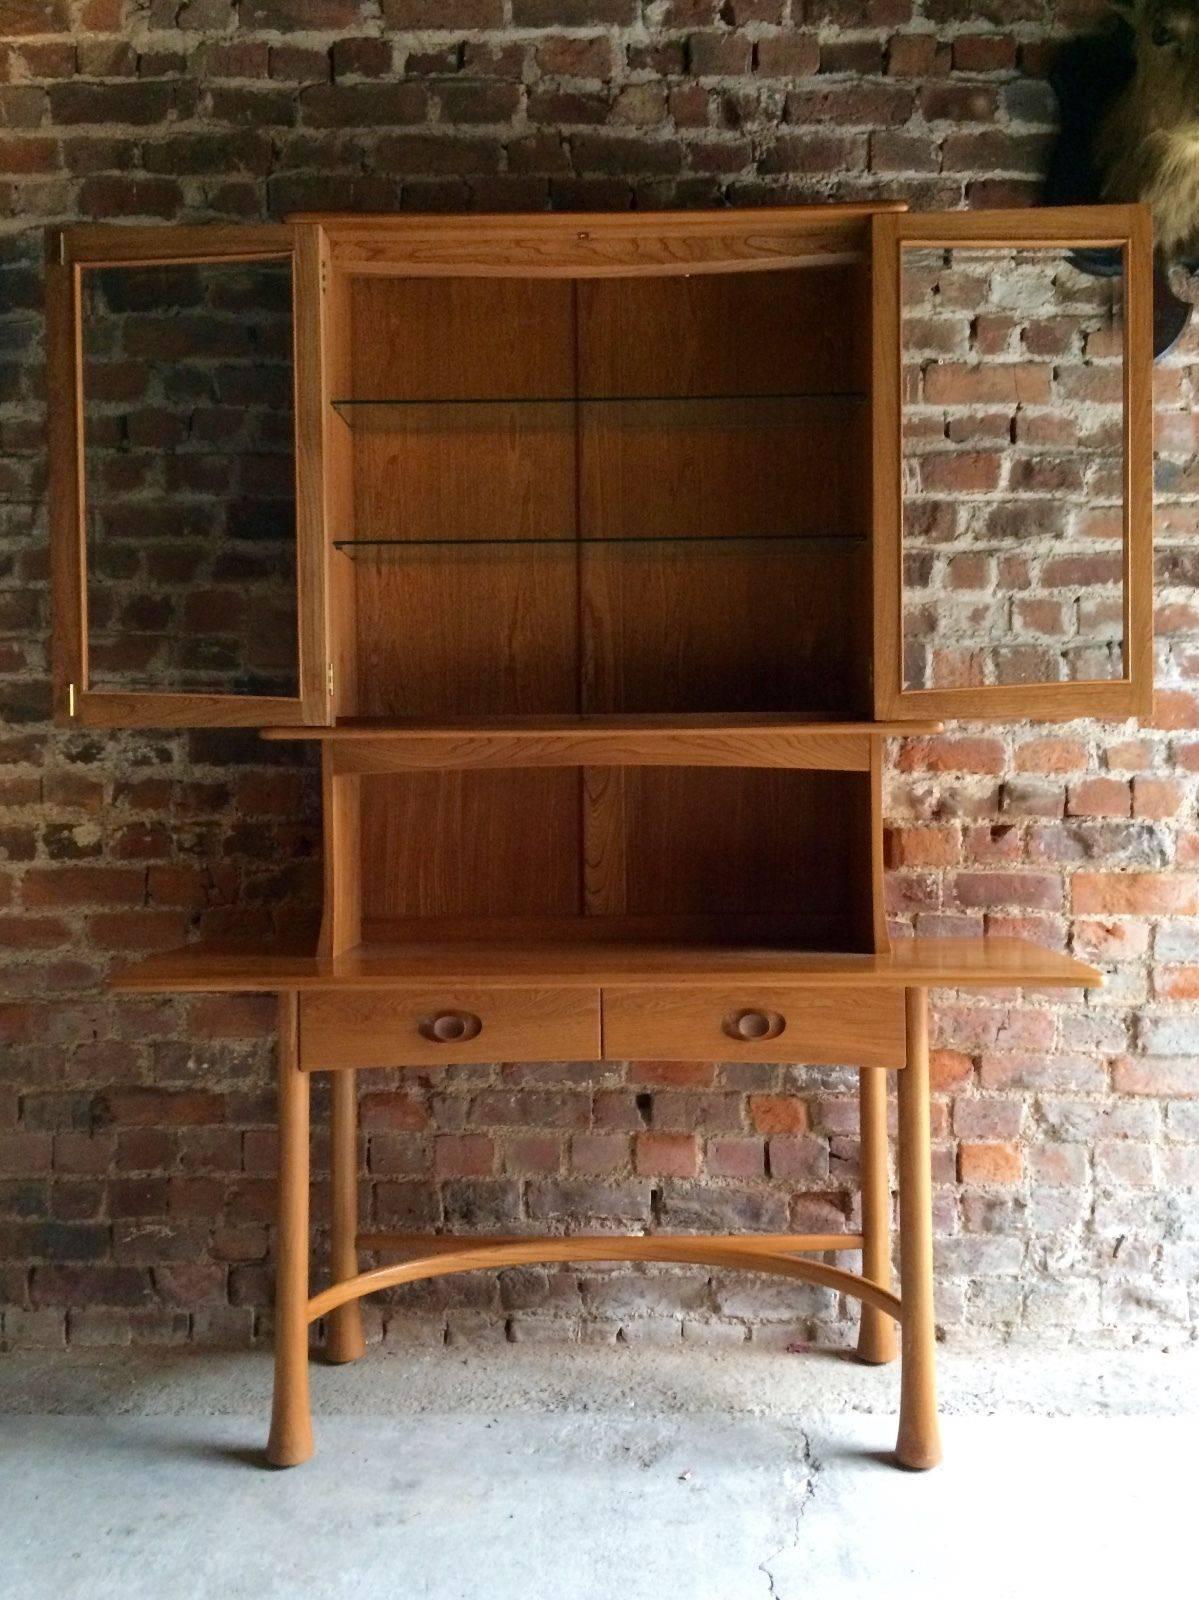 A rare limited edition Ercol 'Kelmscot Range' solid Elm cabinet dated 1987 and numbered 104 of 125, signed and authenticated by Lucian B Ercolani chairman of Ercol. The piece is offered in almost as new condition and is museum quality.
The piece